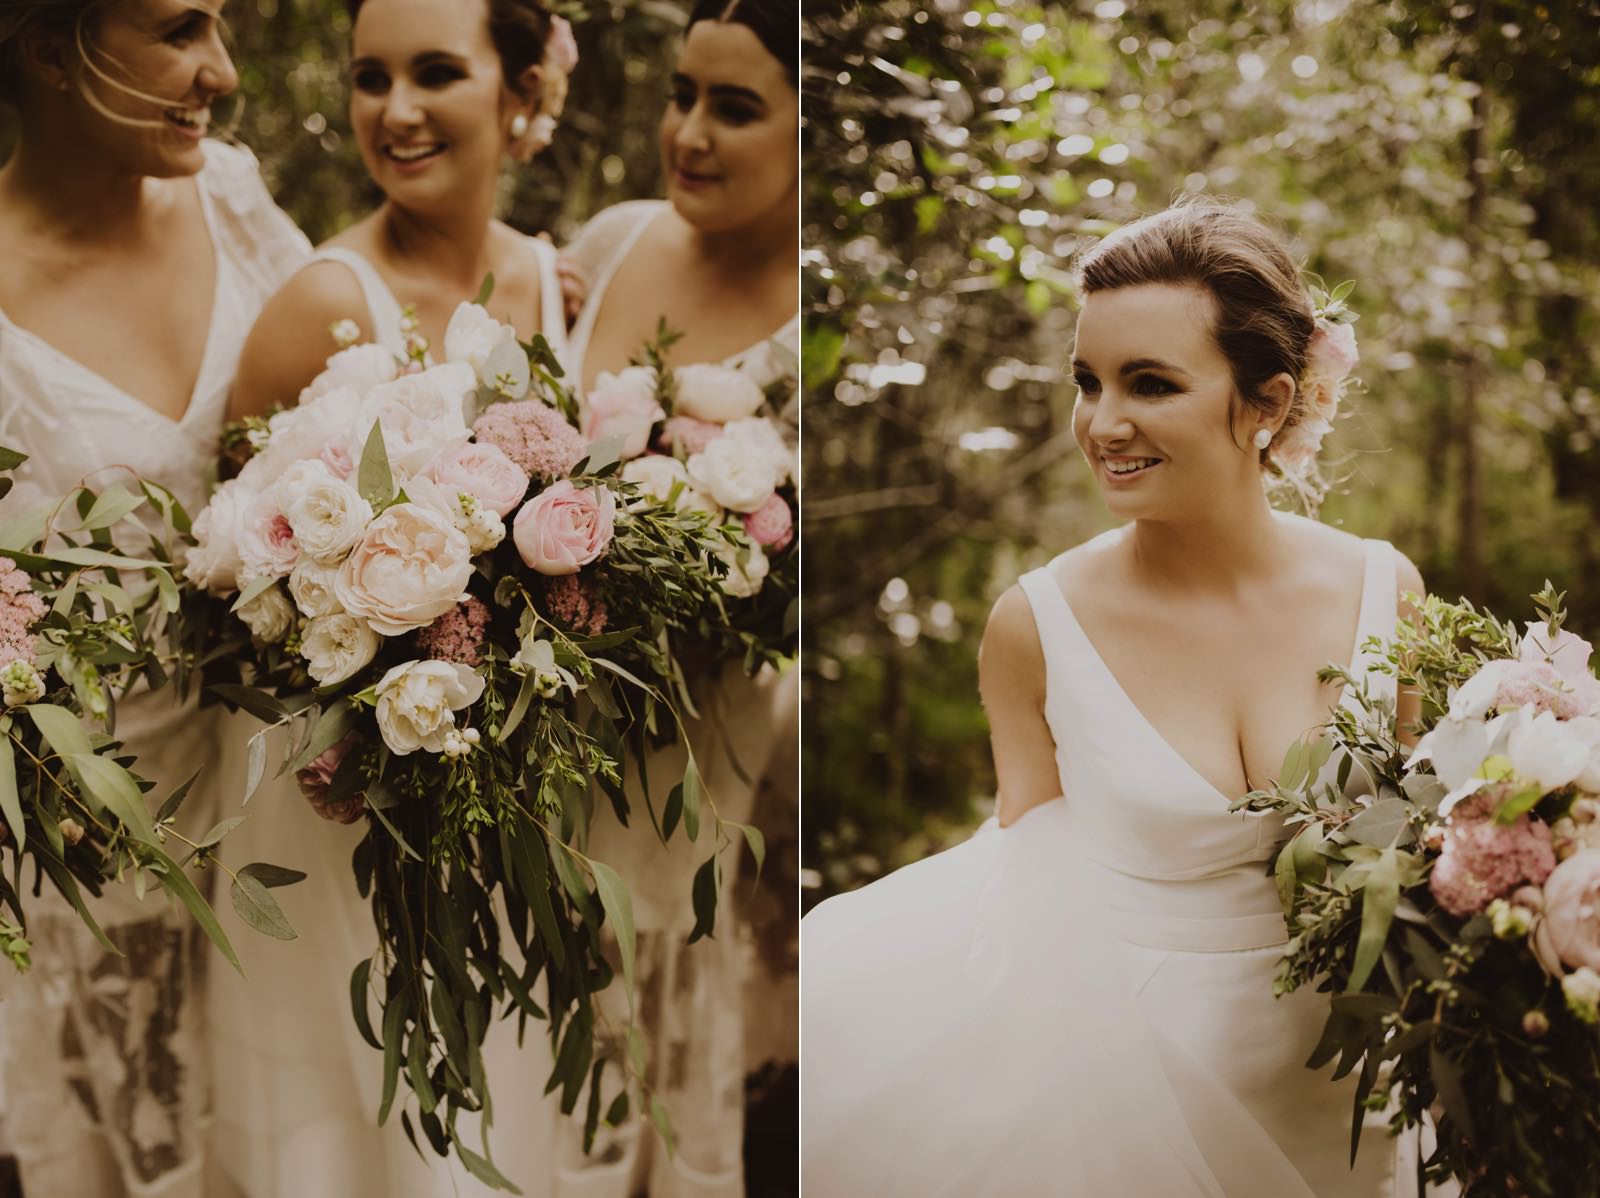 photos of the flowers and sarah portrait